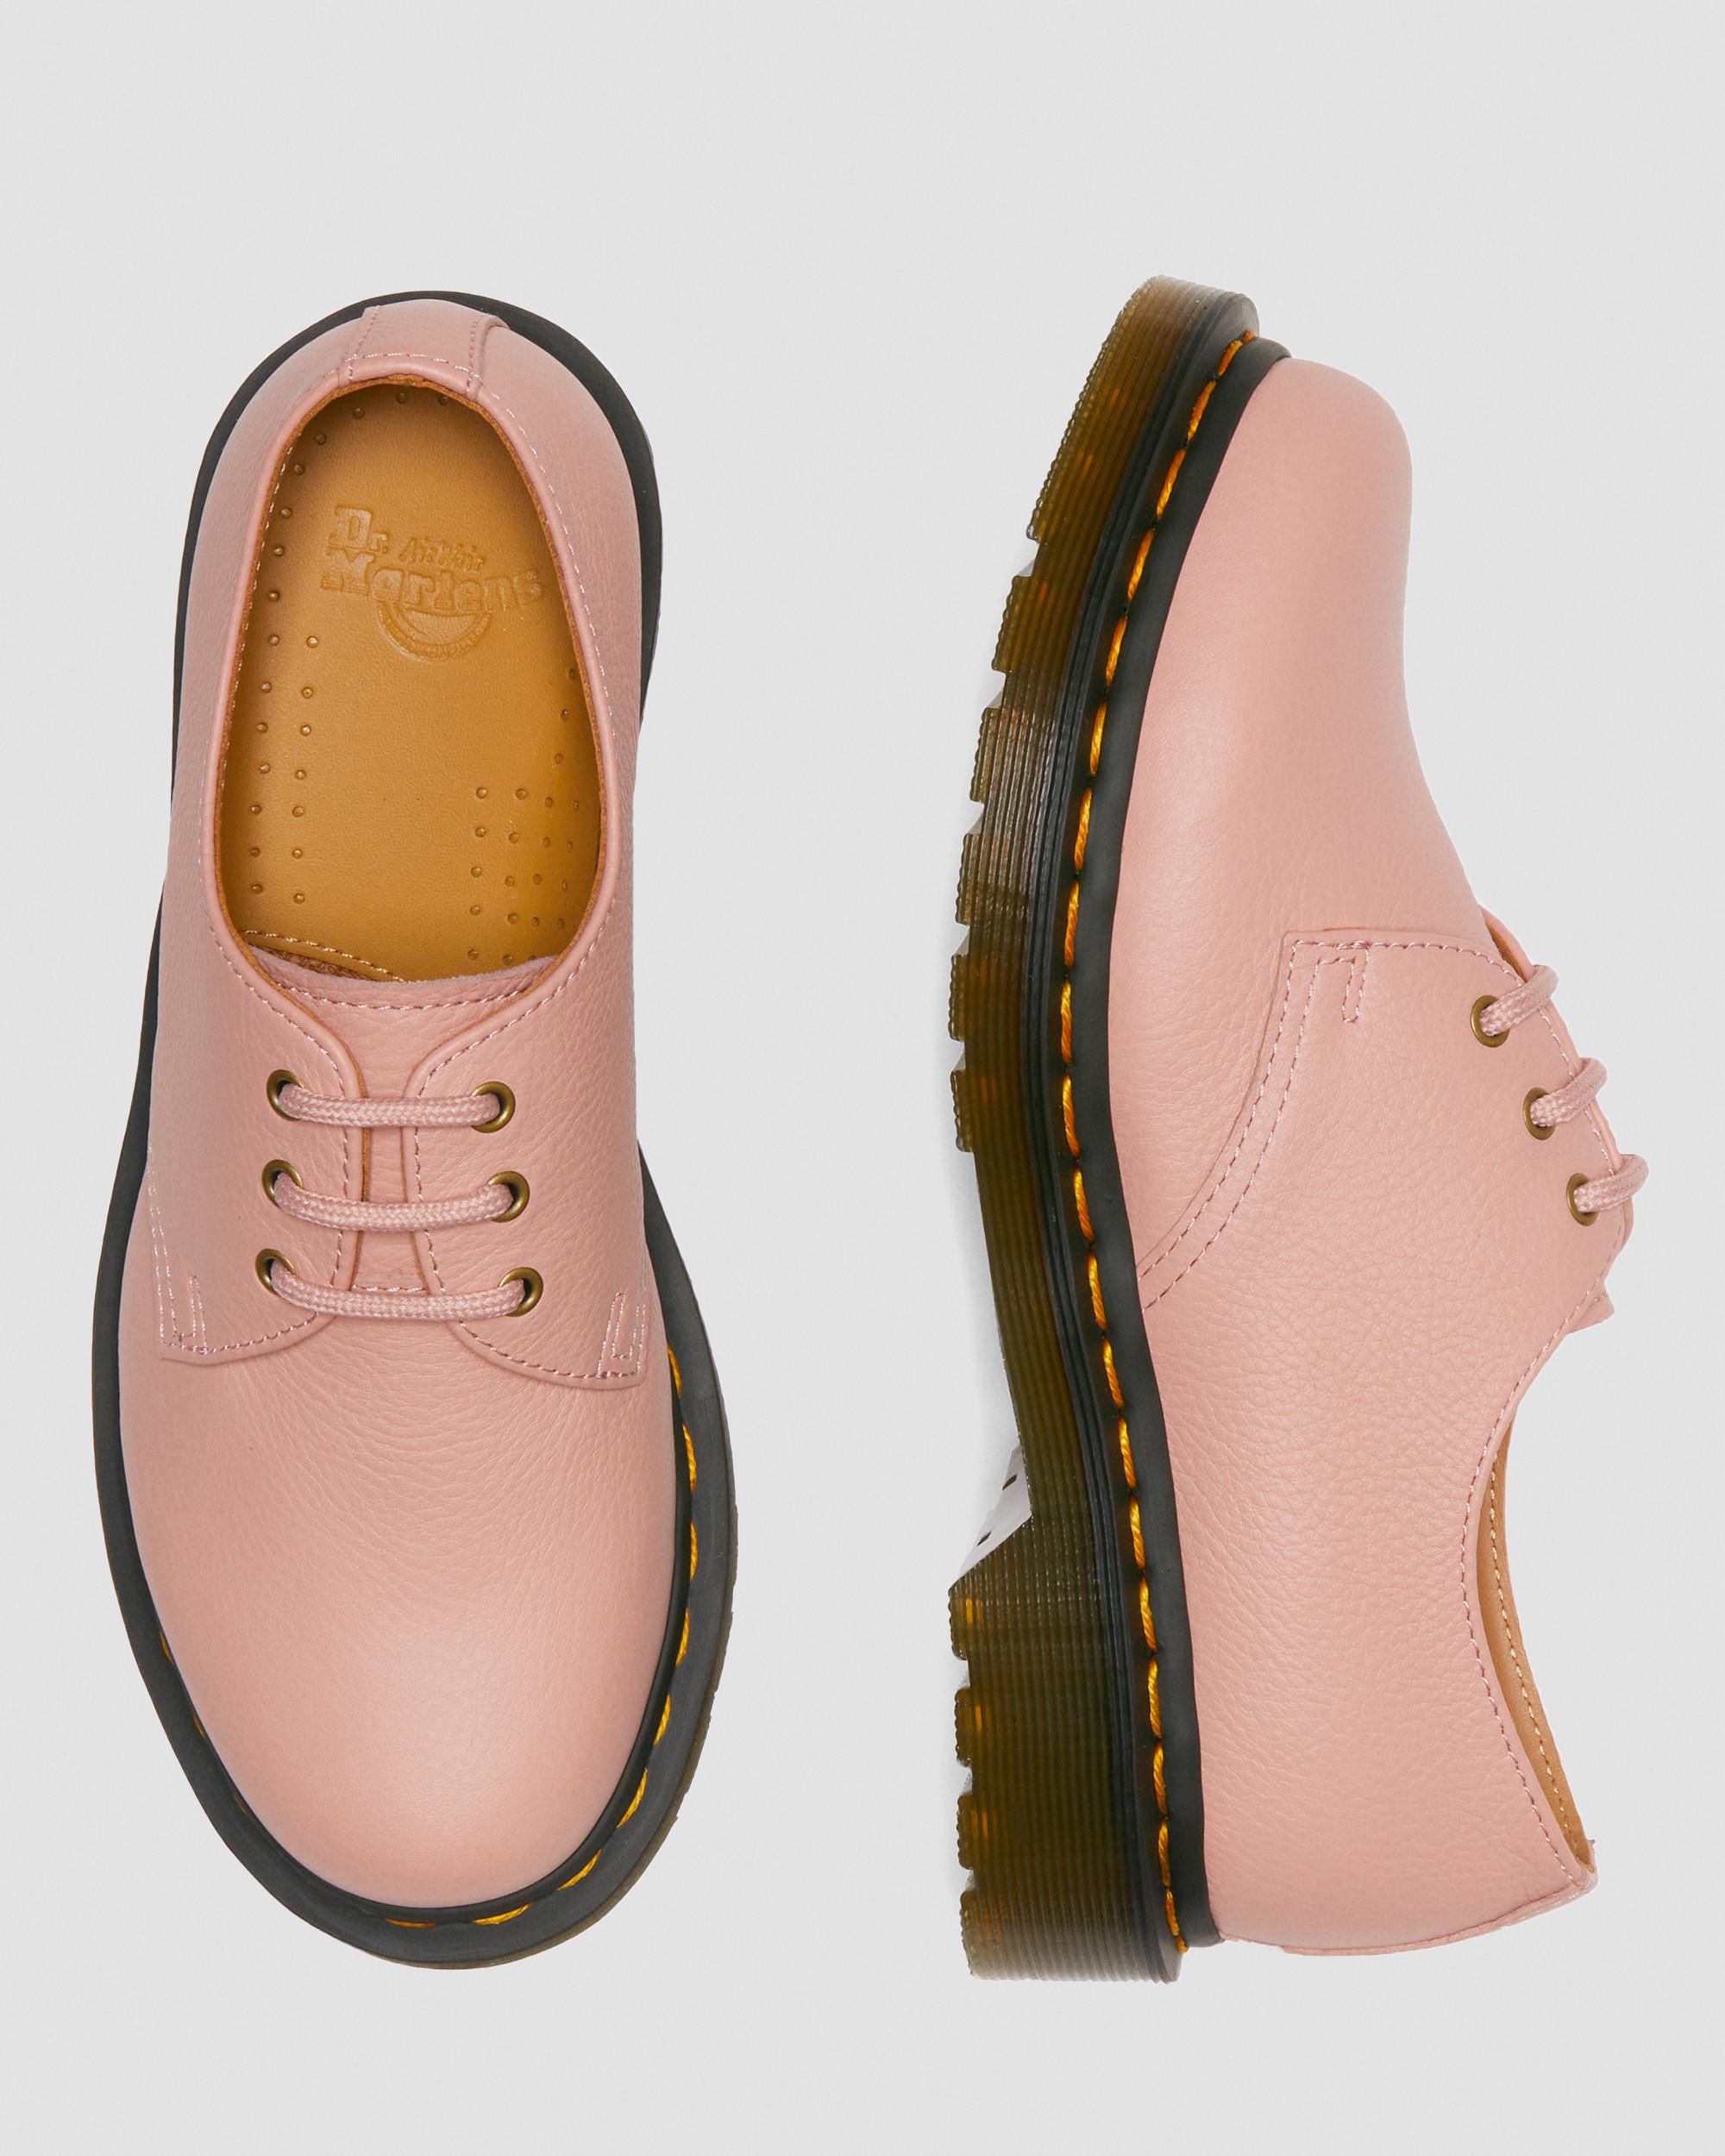 DR MARTENS 1461 Women's Virginia Leather Oxford Shoes